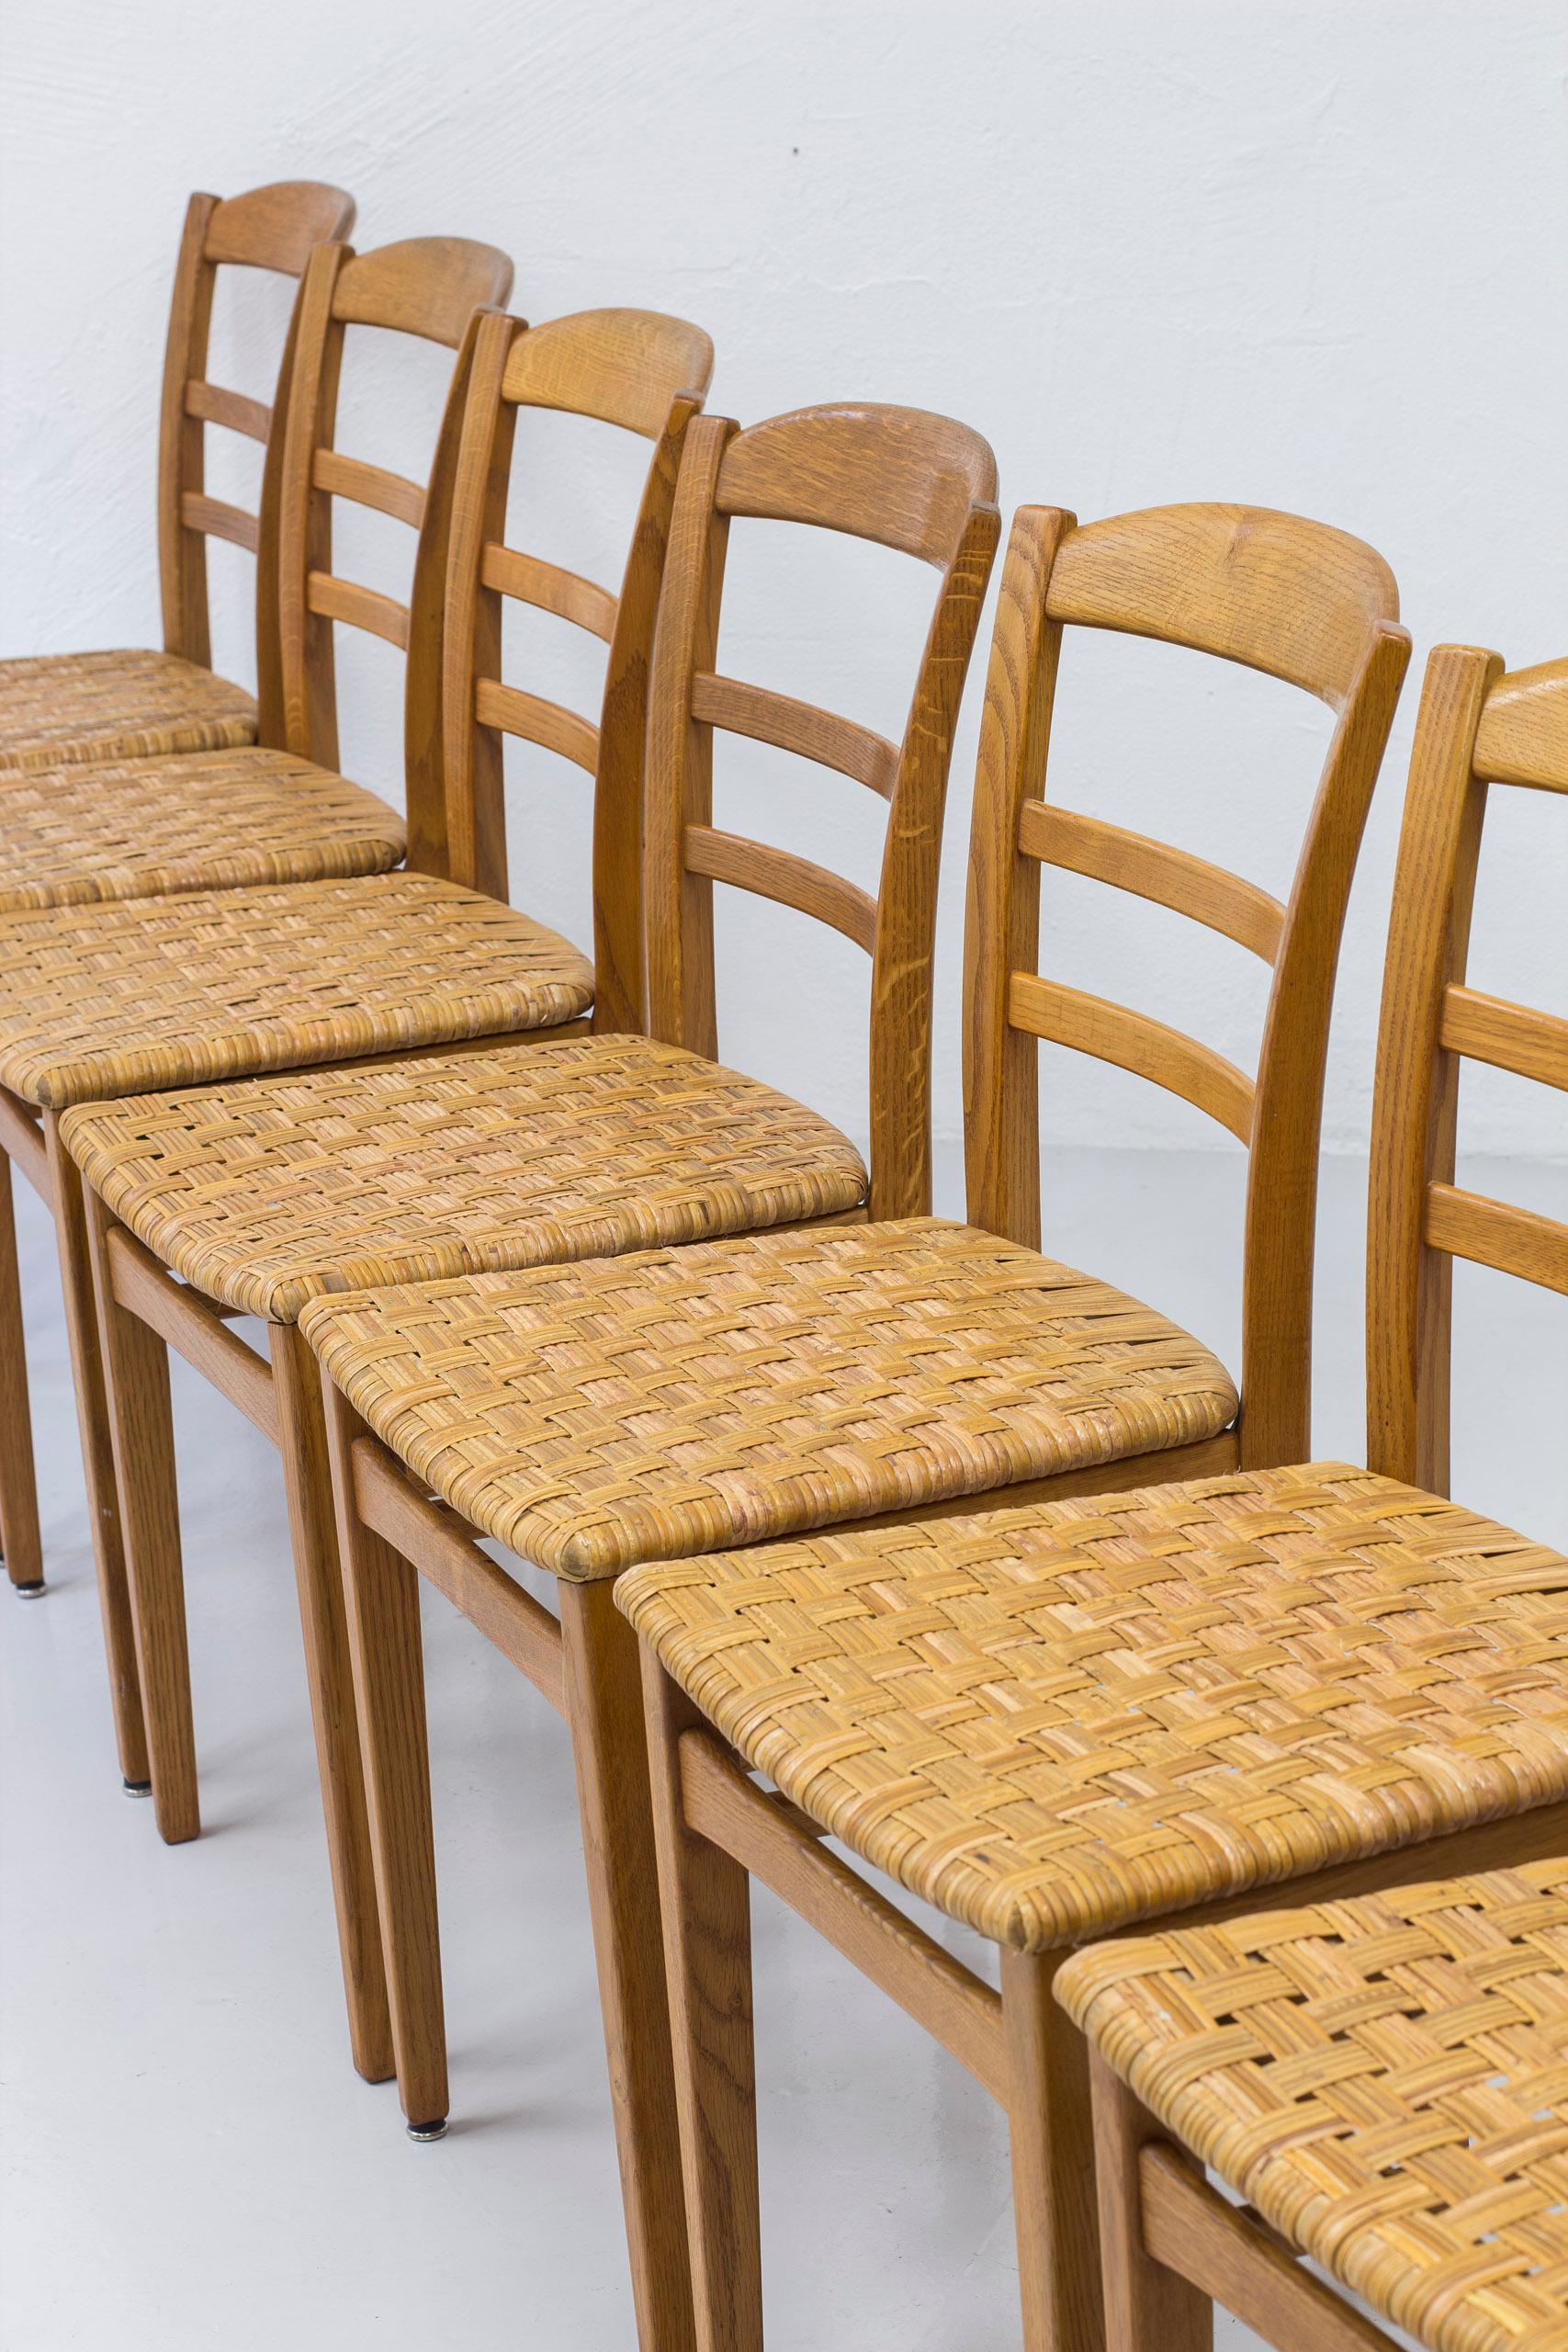 Oak and Cane Weave Dining Chairs by Carl Malmsten, Swedish Modern, 1950s For Sale 8